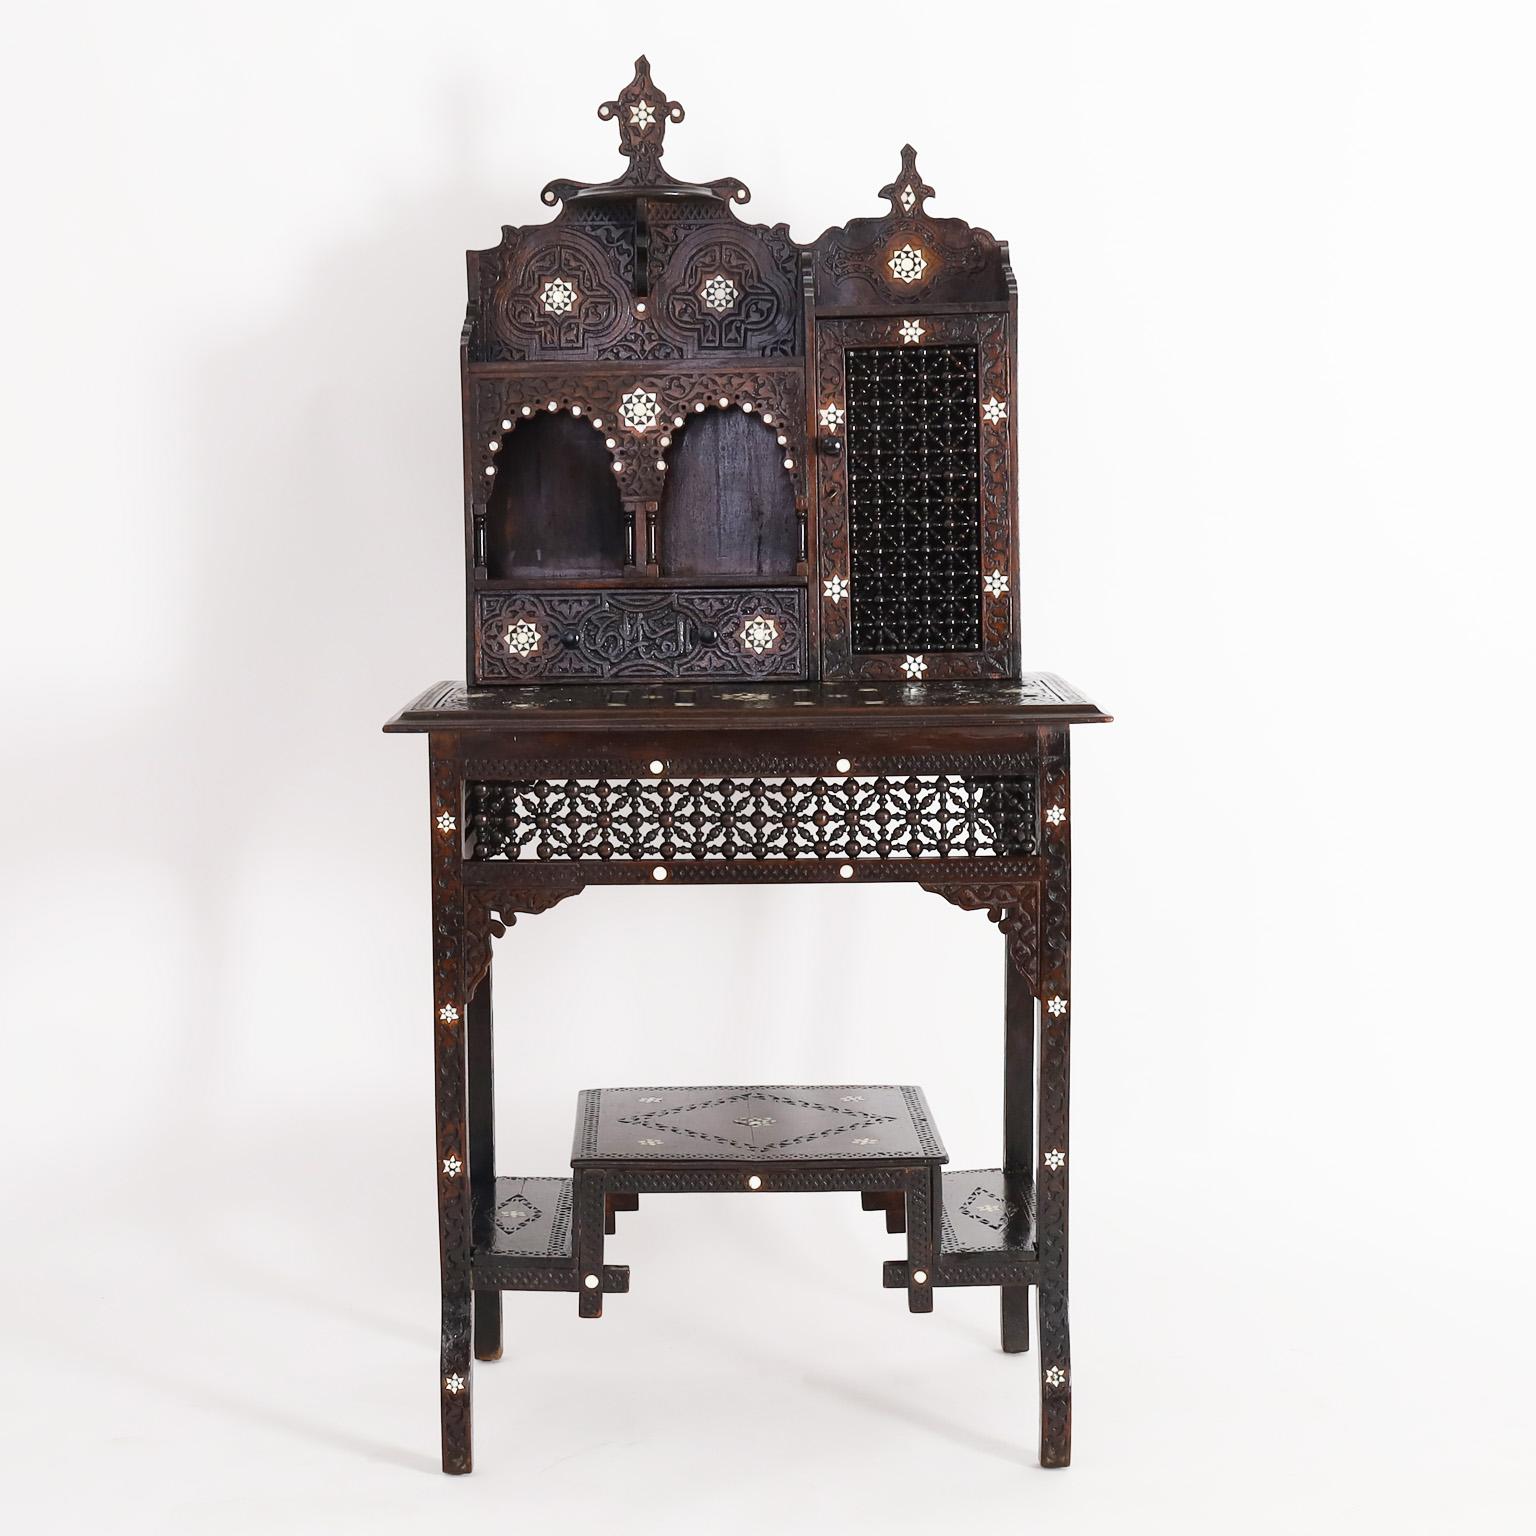 Important 19th century Moroccan escritoire or desk crafted in mahogany with strong aesthetics movement influences. Featuring Moorish architectural references, floral and geometric bone inlays and carvings throughout, including arched niches with